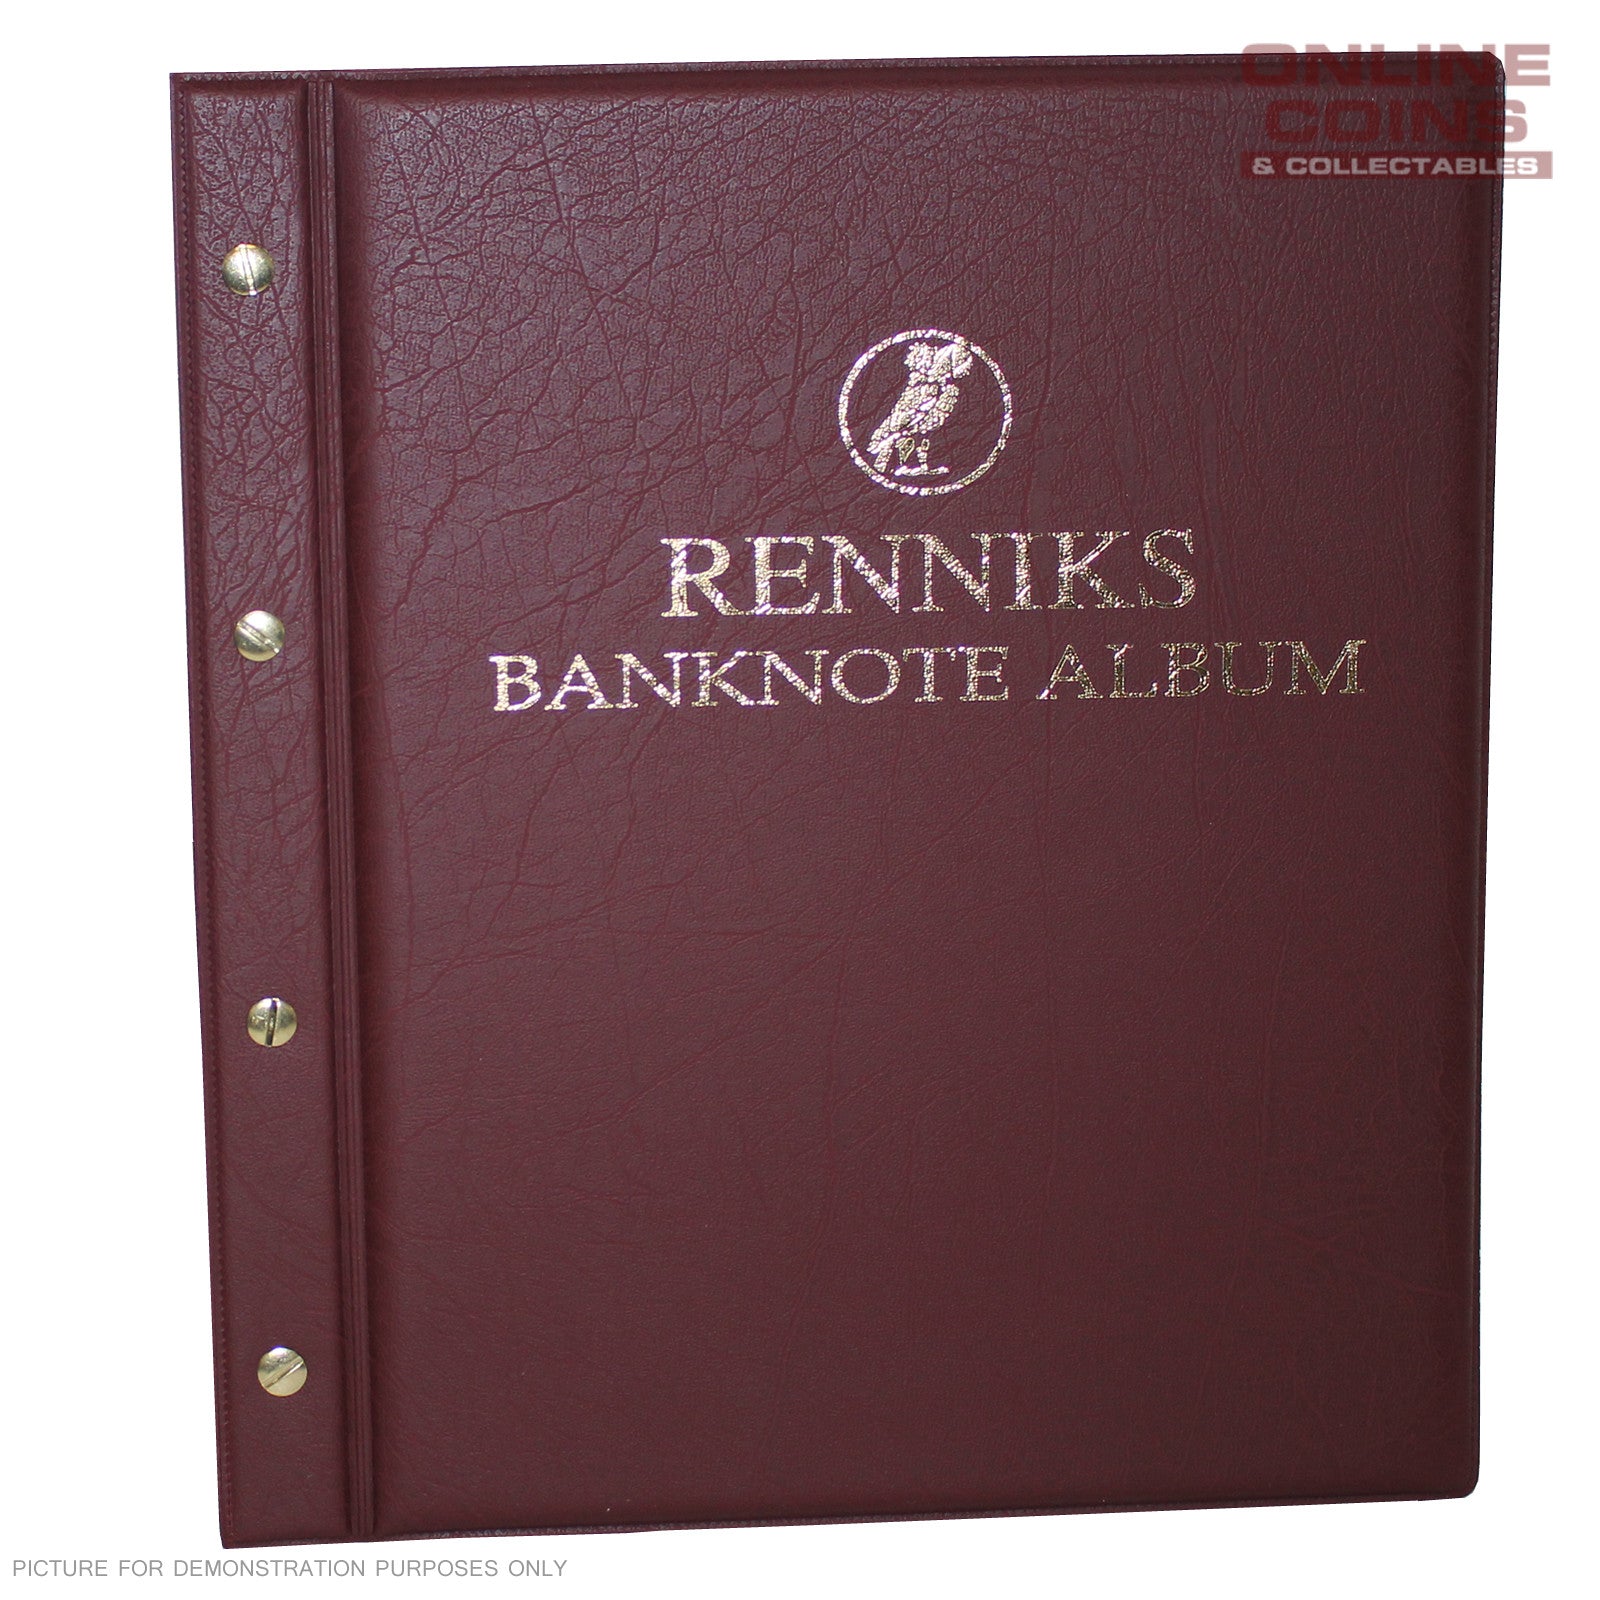 RENNIKS Banknote Album including 6 Note Album Pages - RED